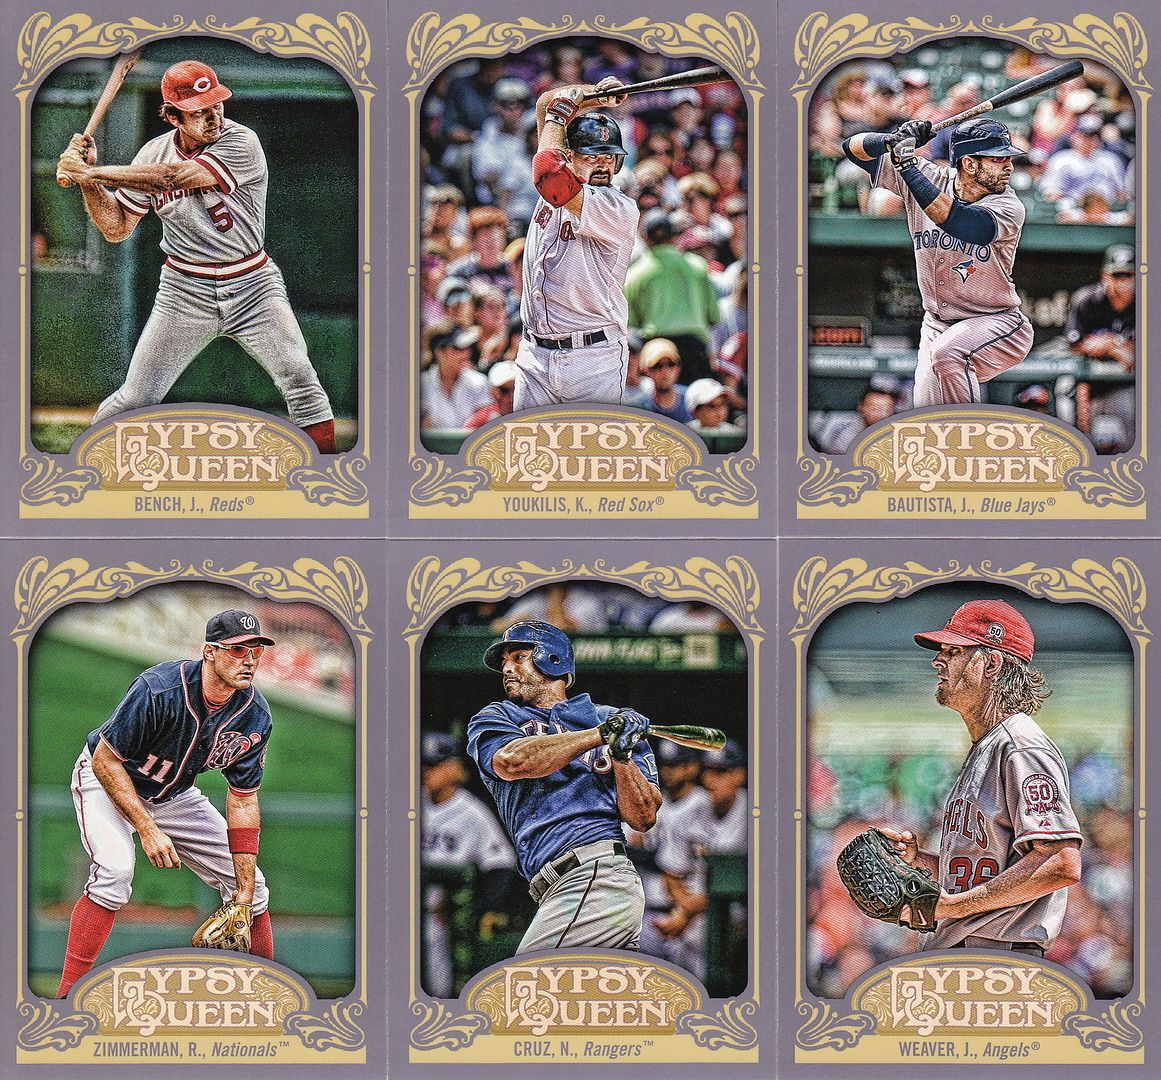 2012 Topps Gypsy Queen Kevin Youkilis Sp Variation